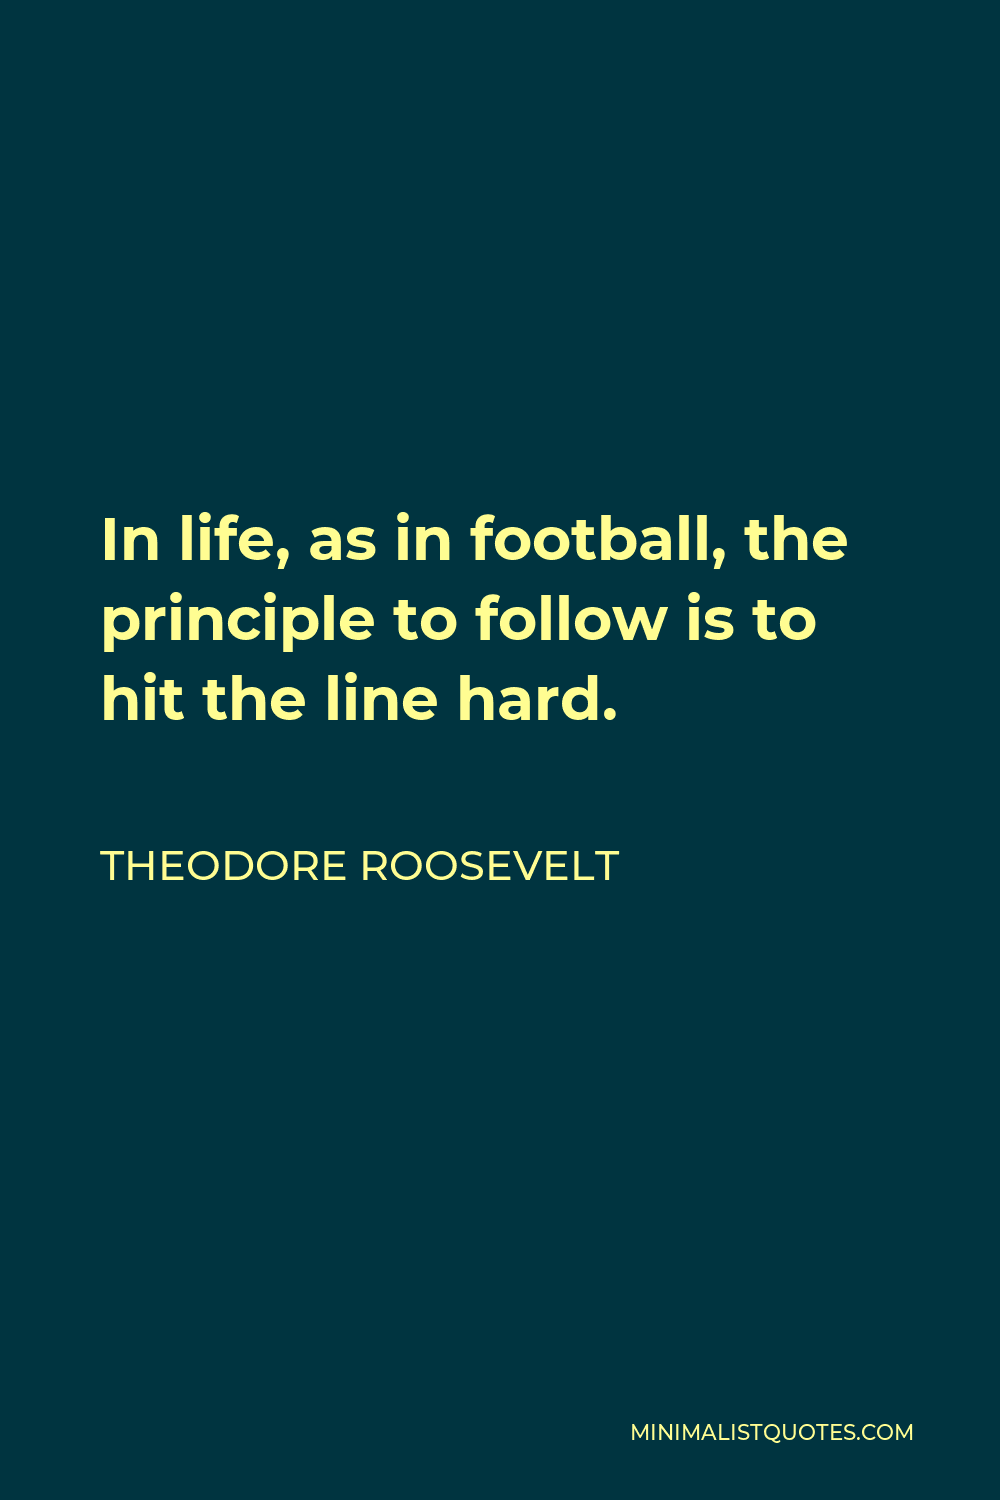 Theodore Roosevelt Quote - In life, as in football, the principle to follow is to hit the line hard.